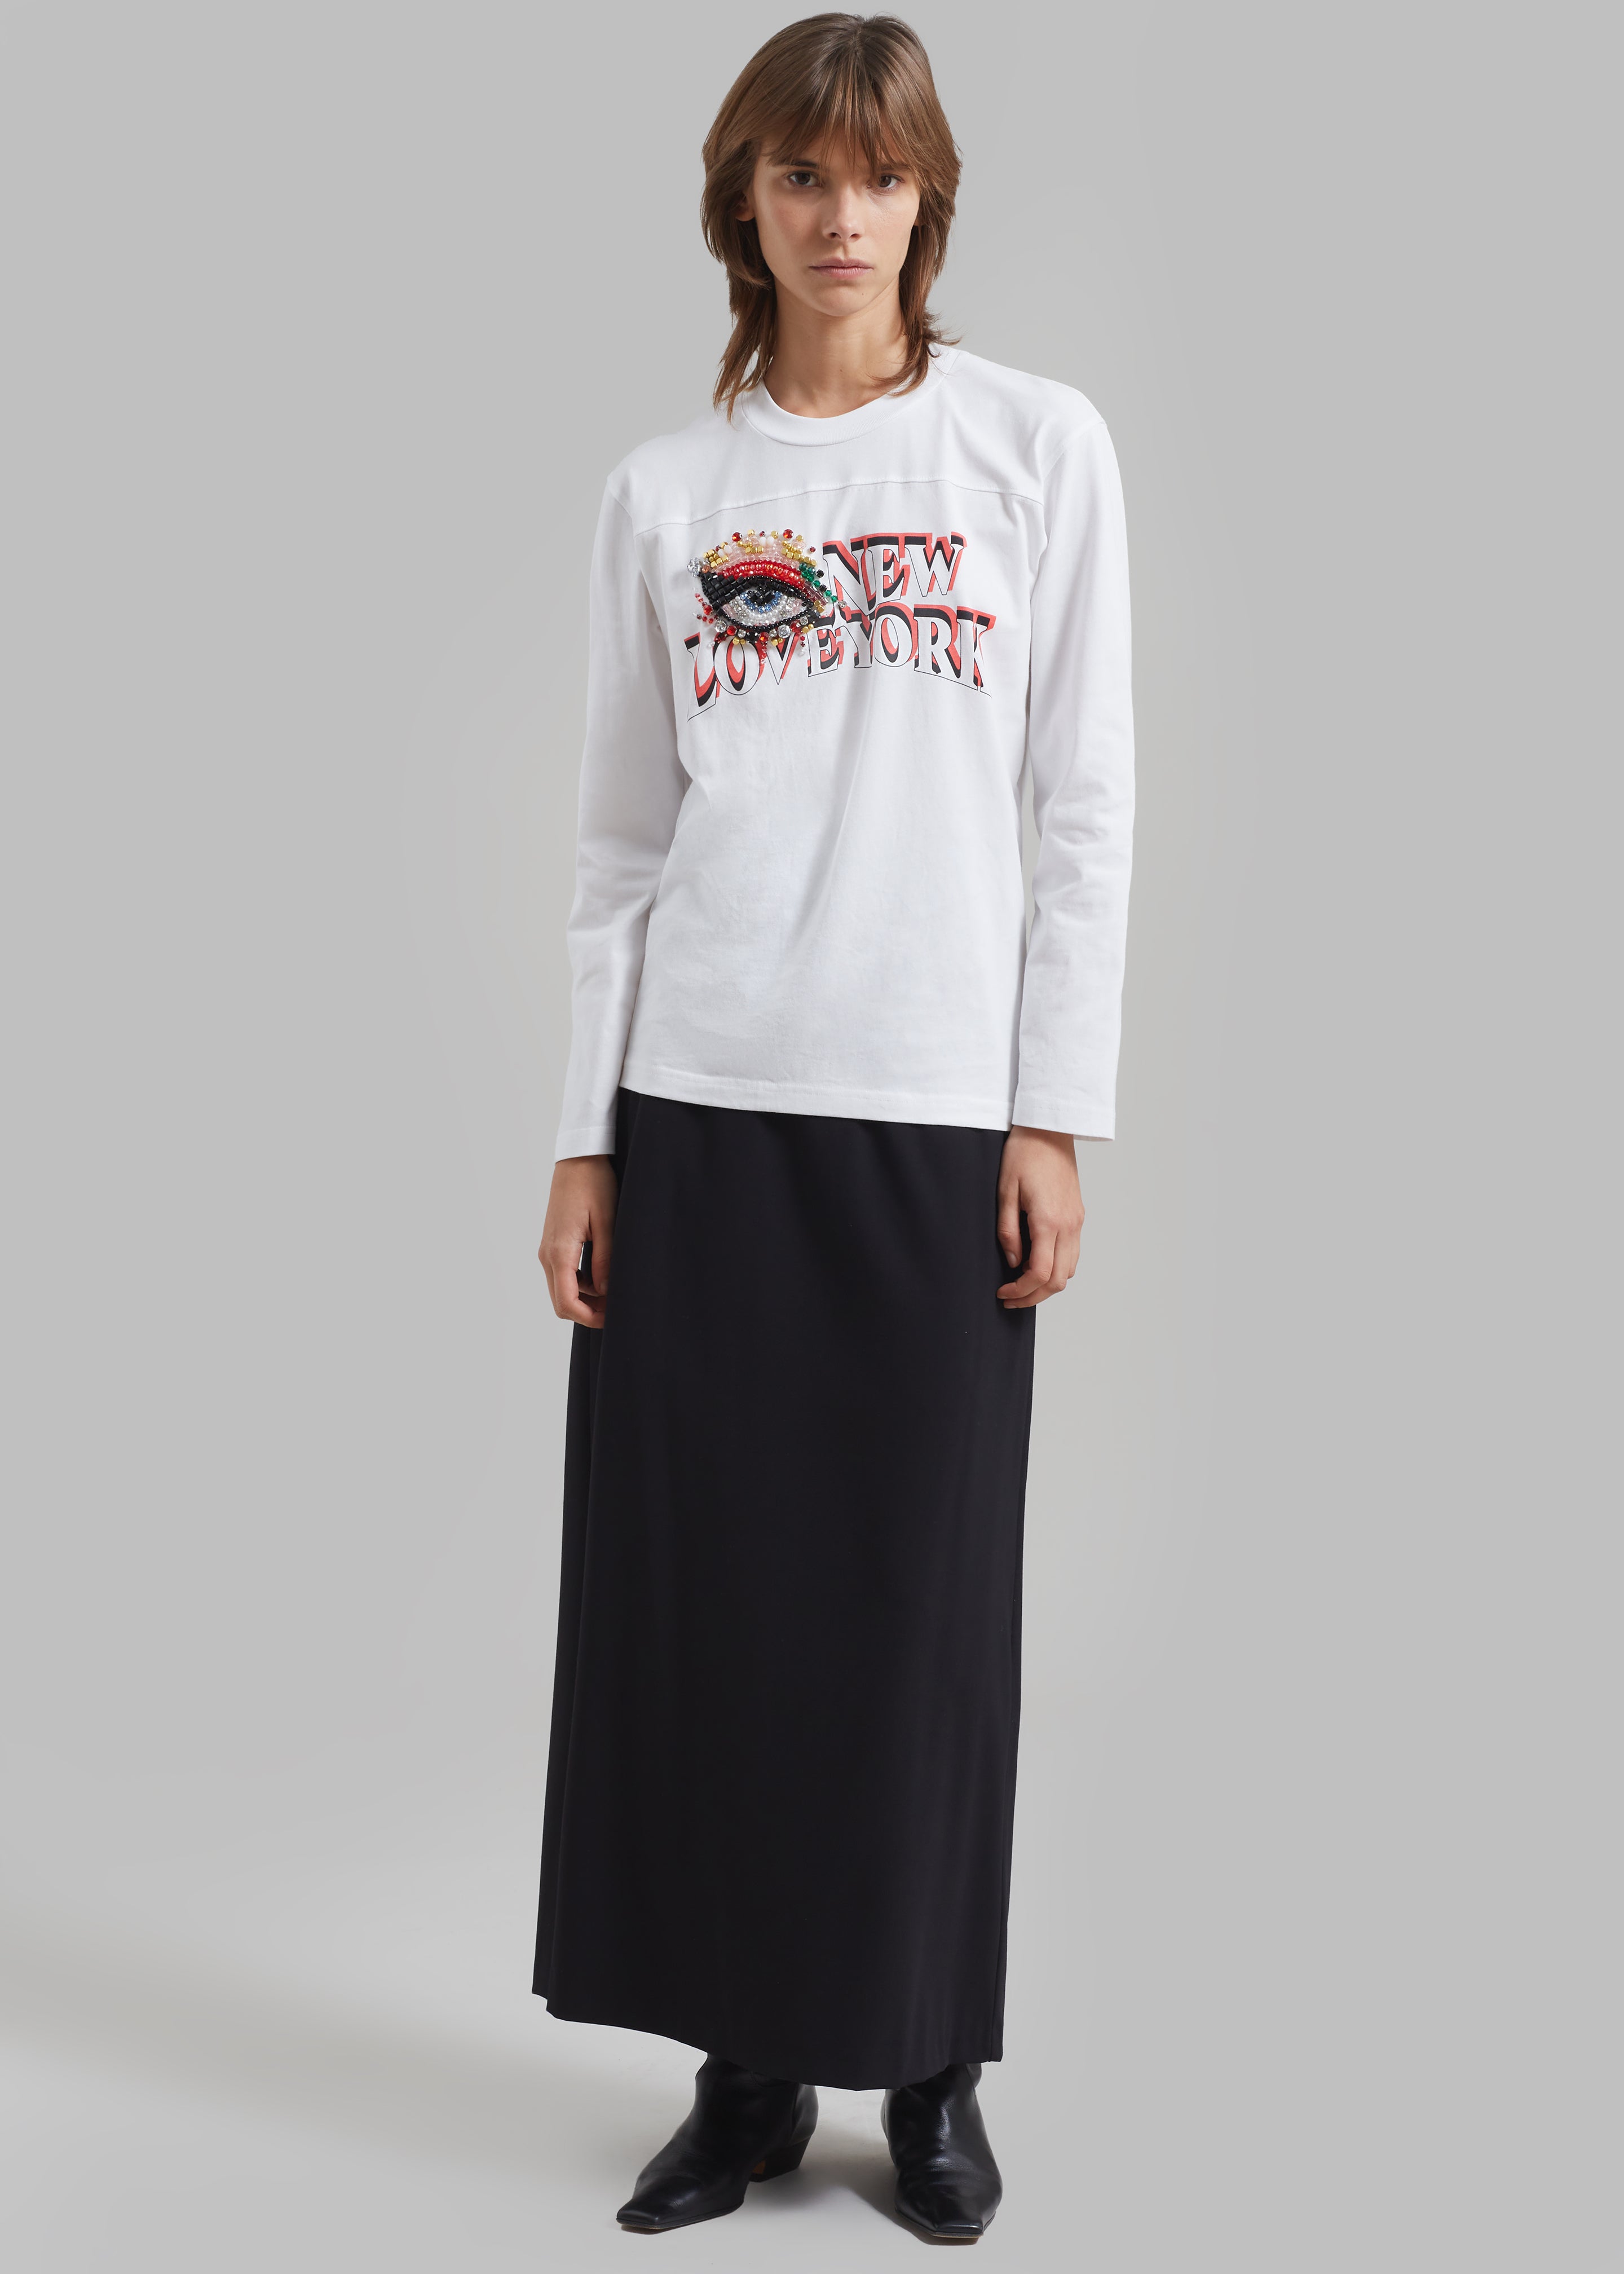 3.1 Phillip Lim Eye Love NY Embroidered Long Sleeve Relaxed Tee - White